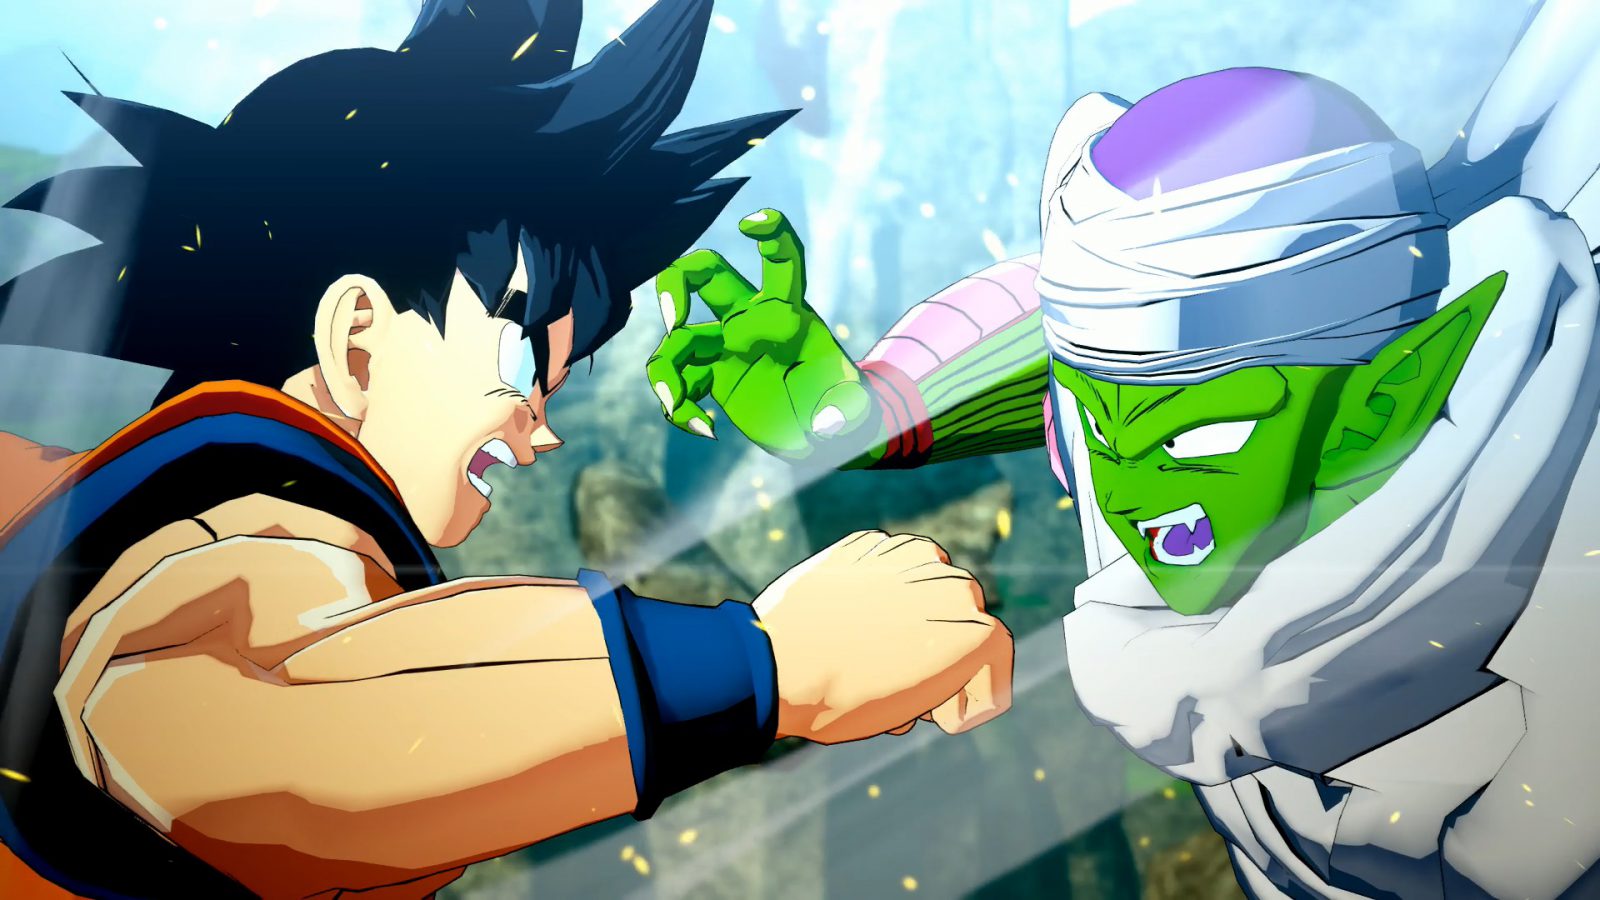 Rock the dragon — Dragon Ball Z: Kakarot hands-on at E3 - GAMING TREND